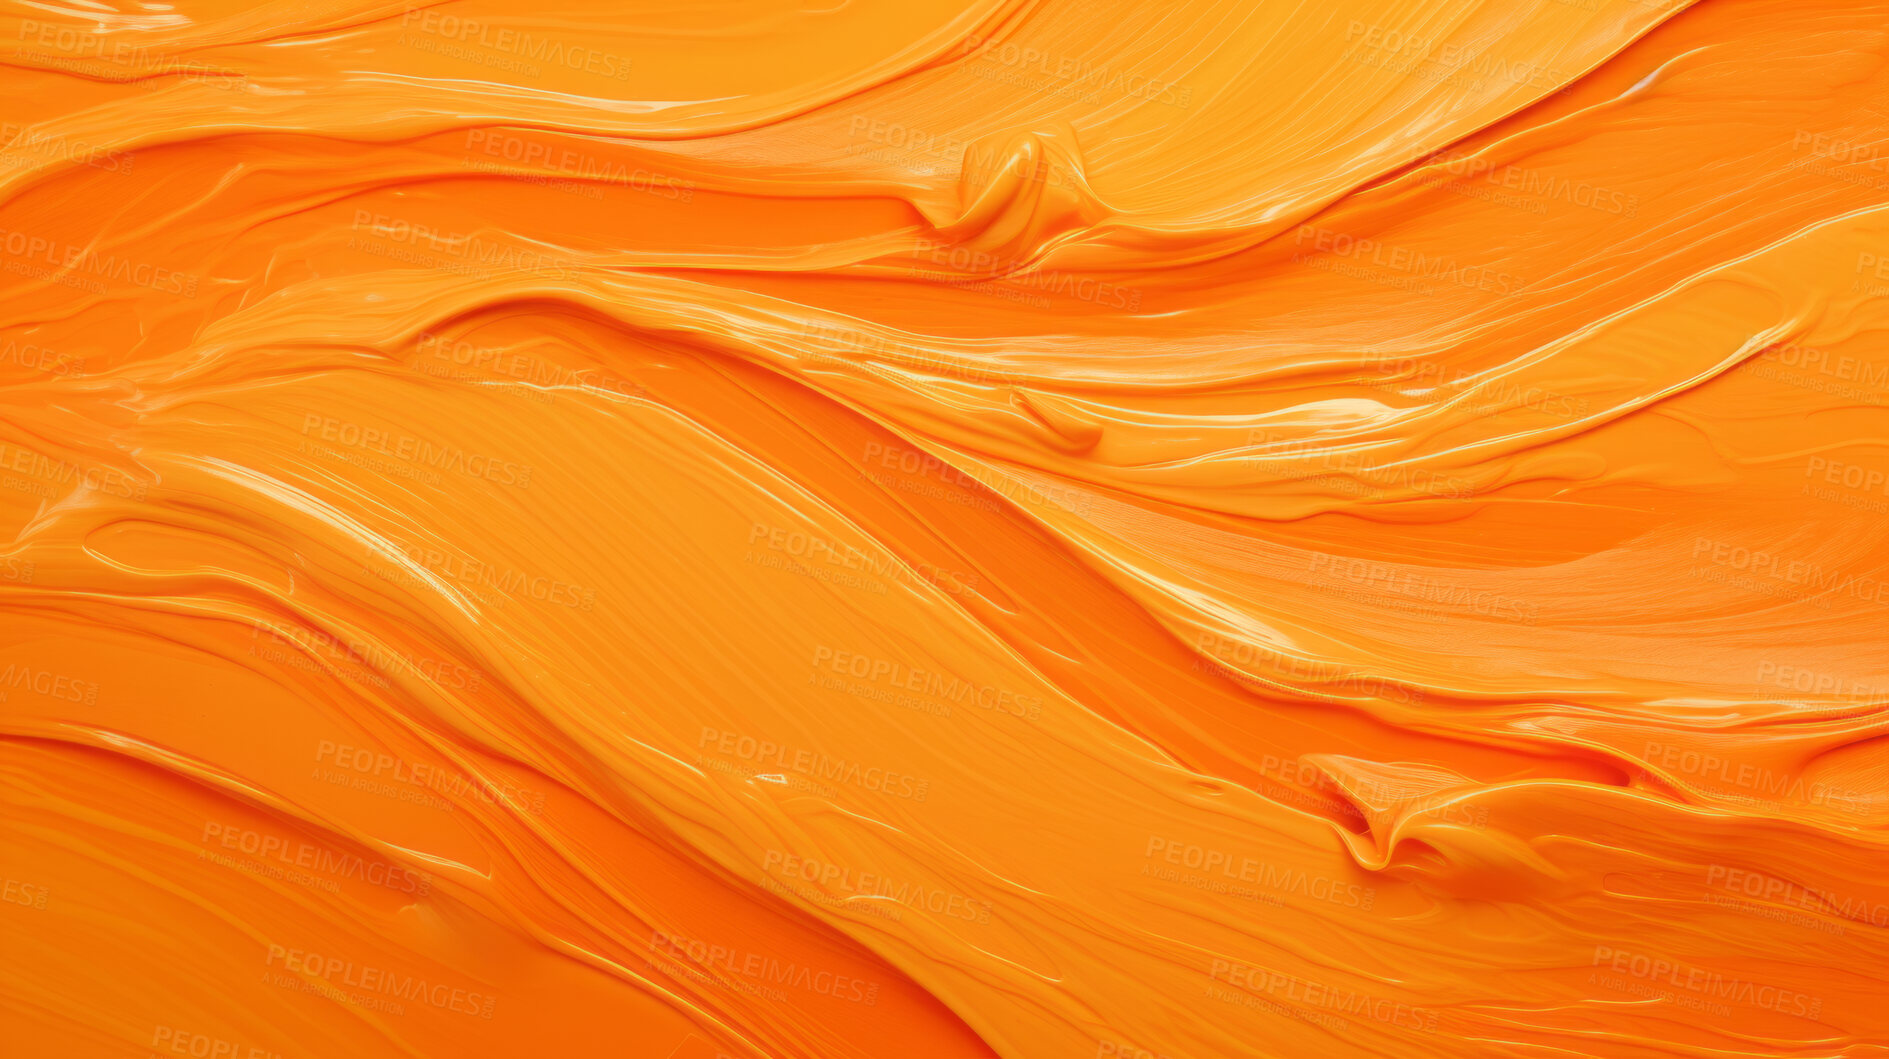 Buy stock photo Orange smooth paint texture close-up. Swirl abstract background.